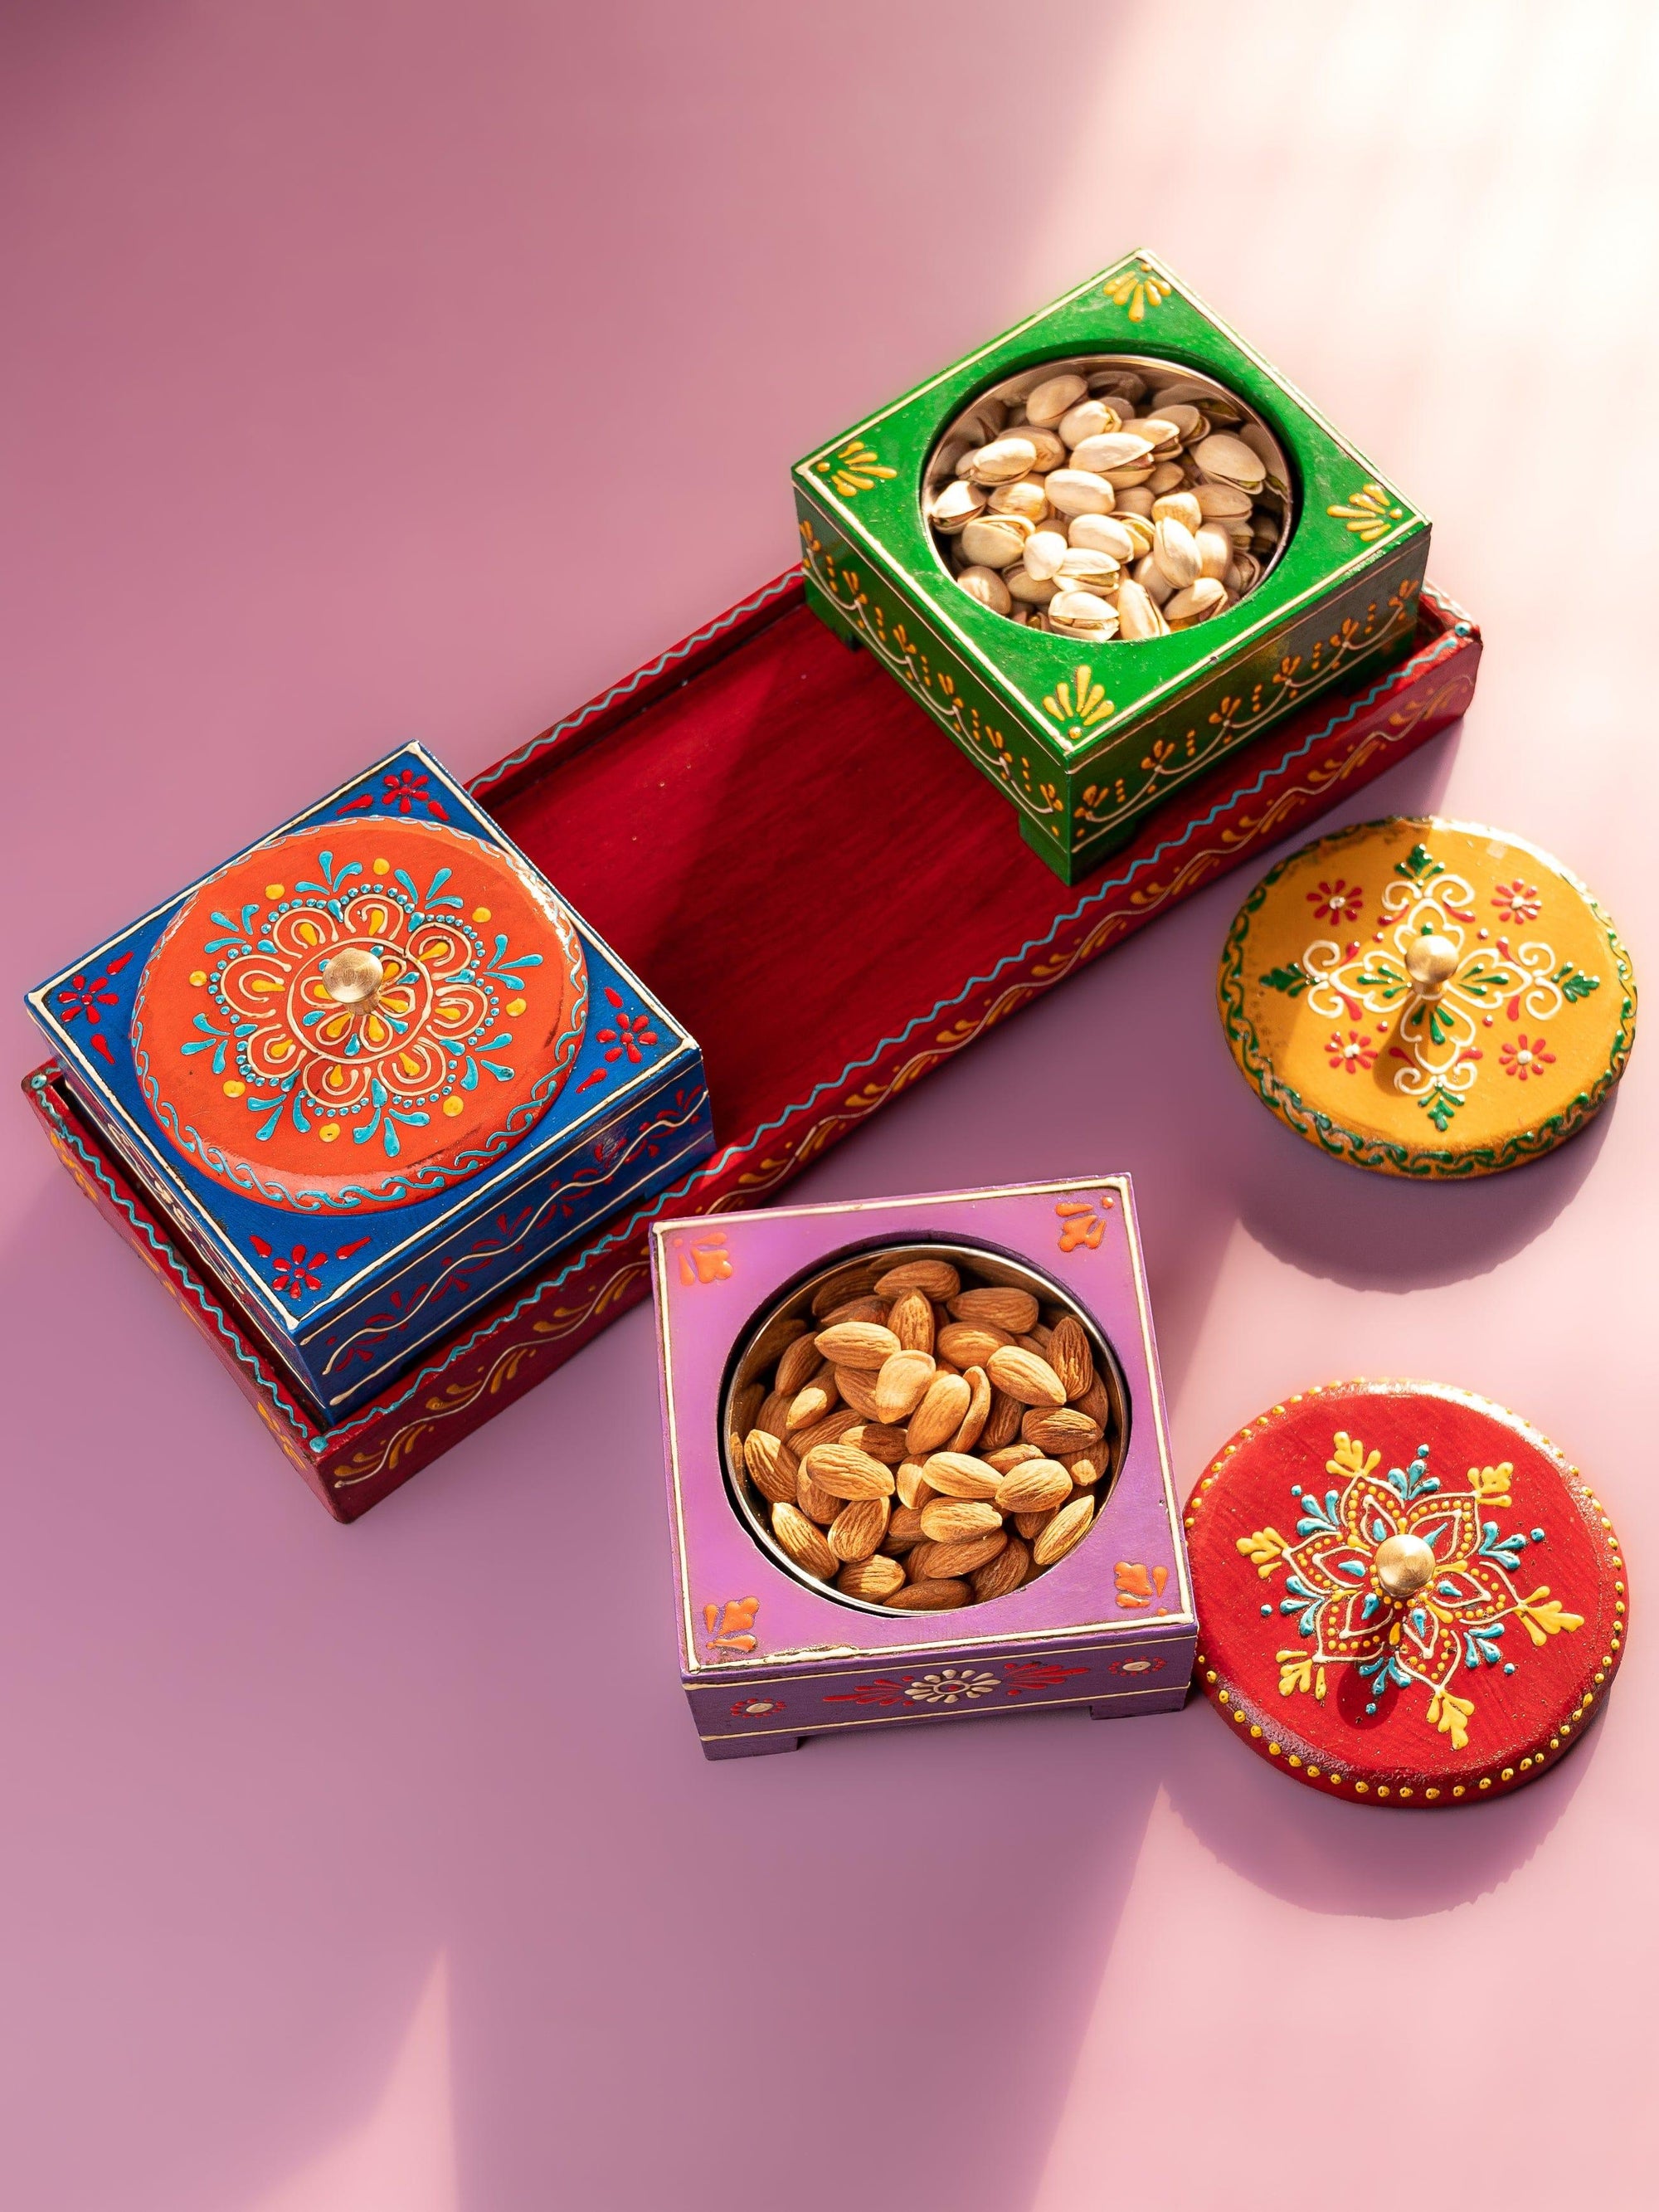 4 Jars Dry Fruits Gift Box in Delhi,4 Jars Dry Fruits Gift Box Manufacturer, Supplier and Exporter